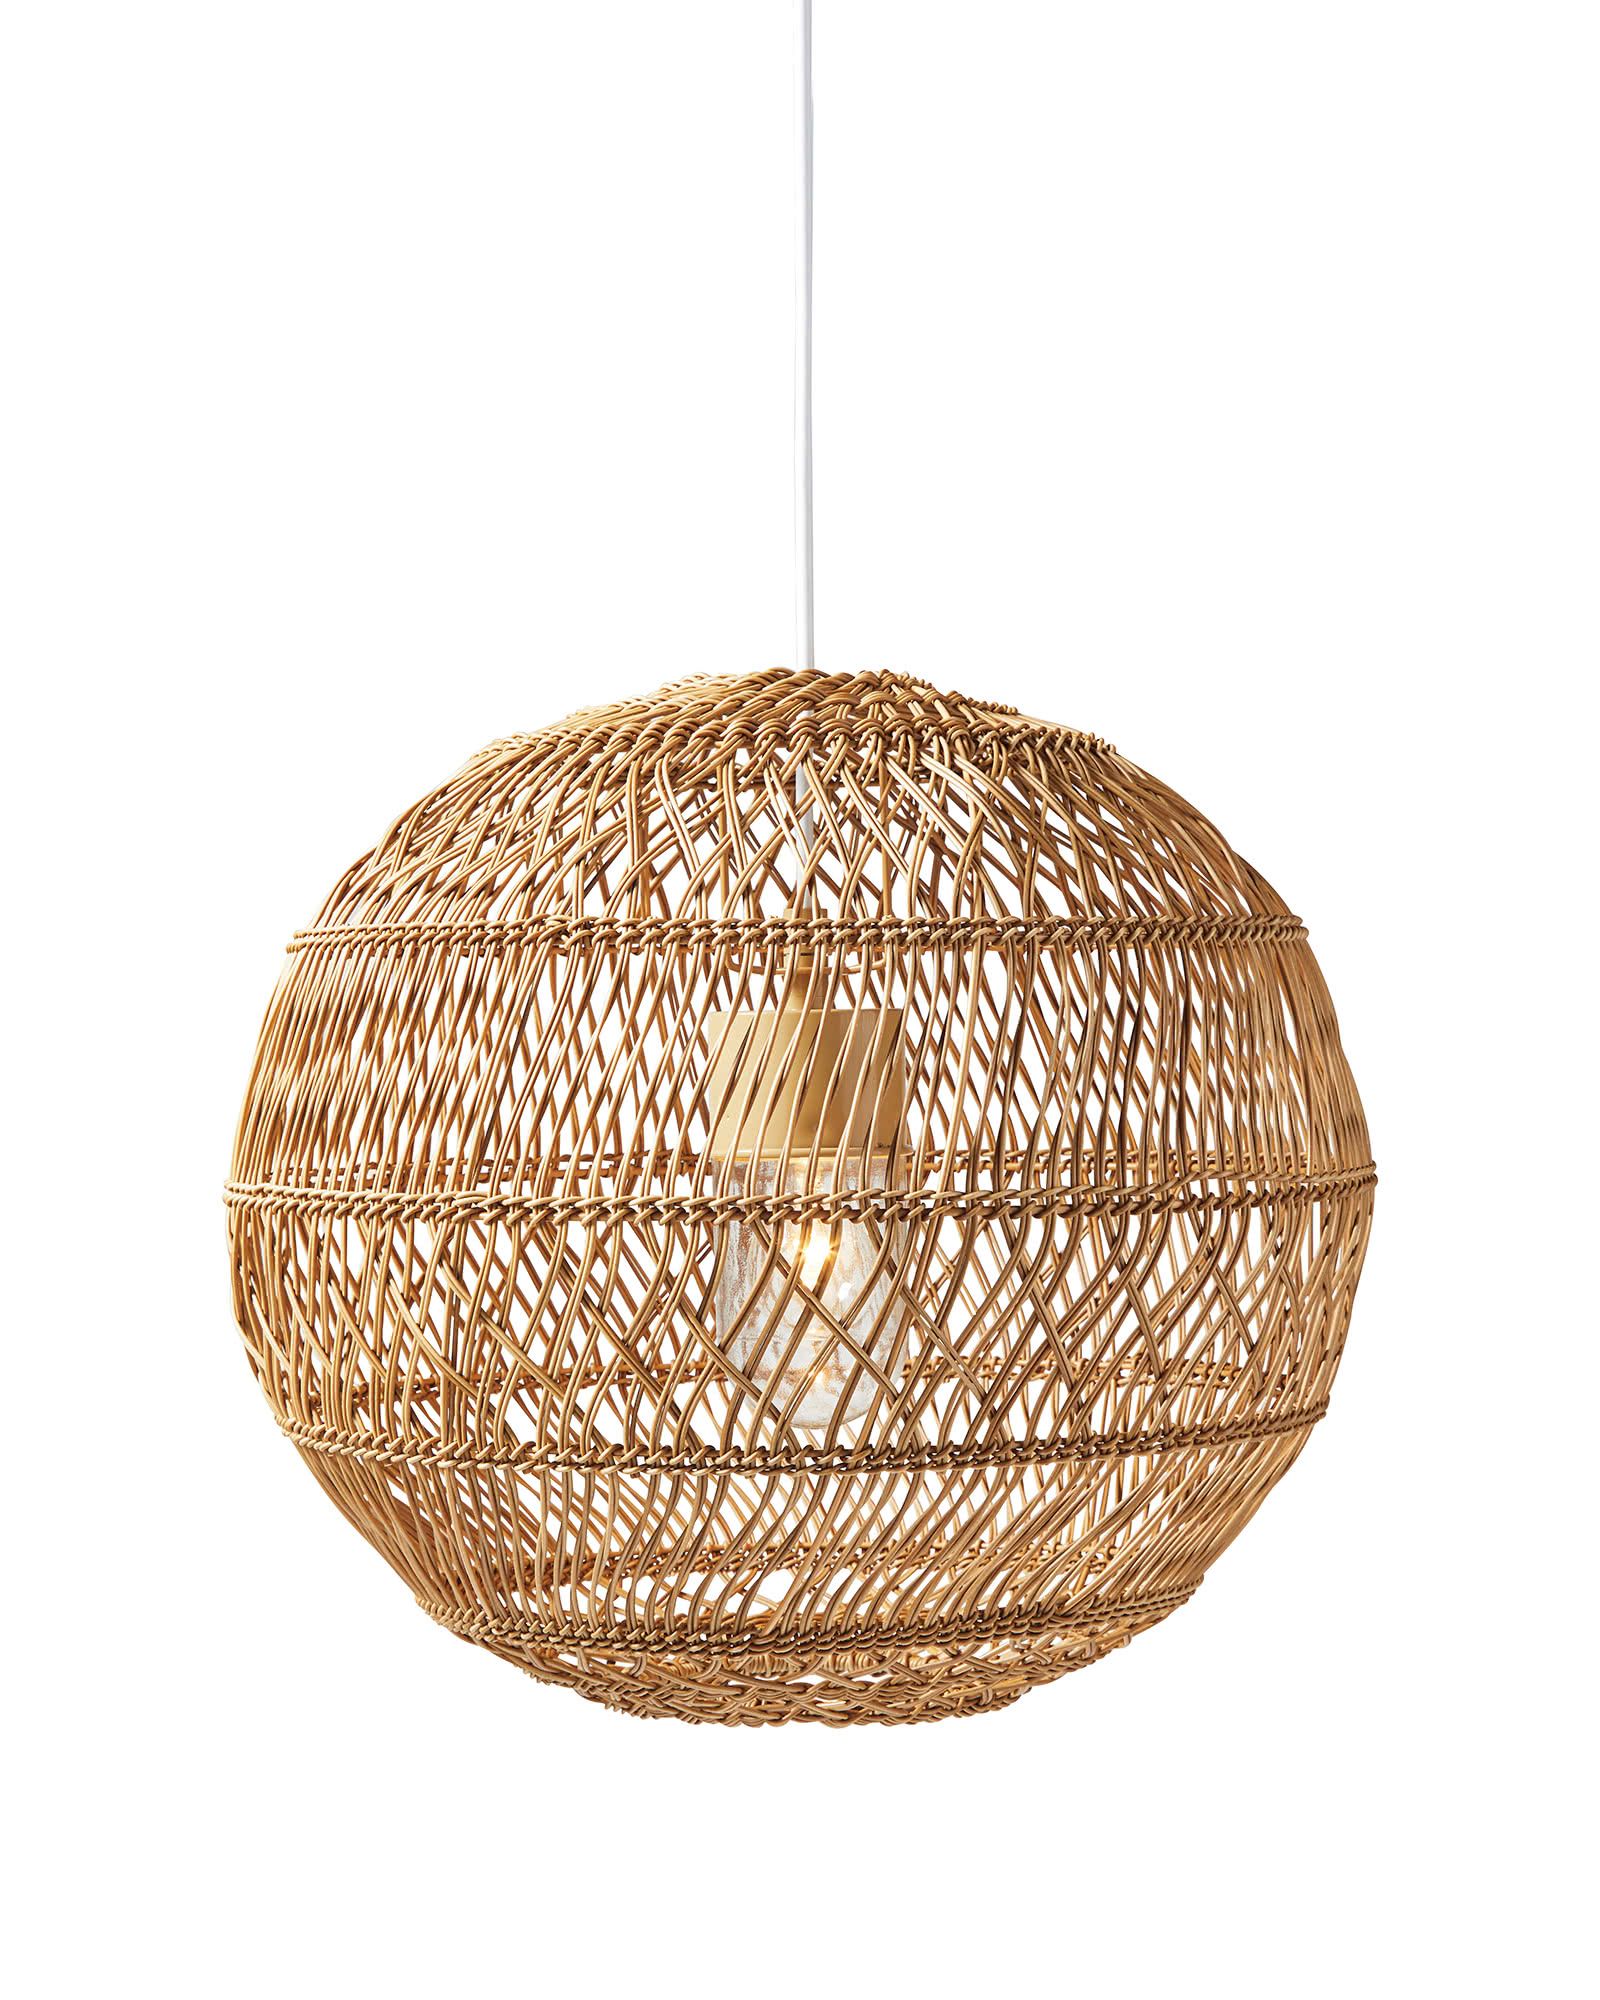 Summerland Outdoor Round Pendant | Serena and Lily